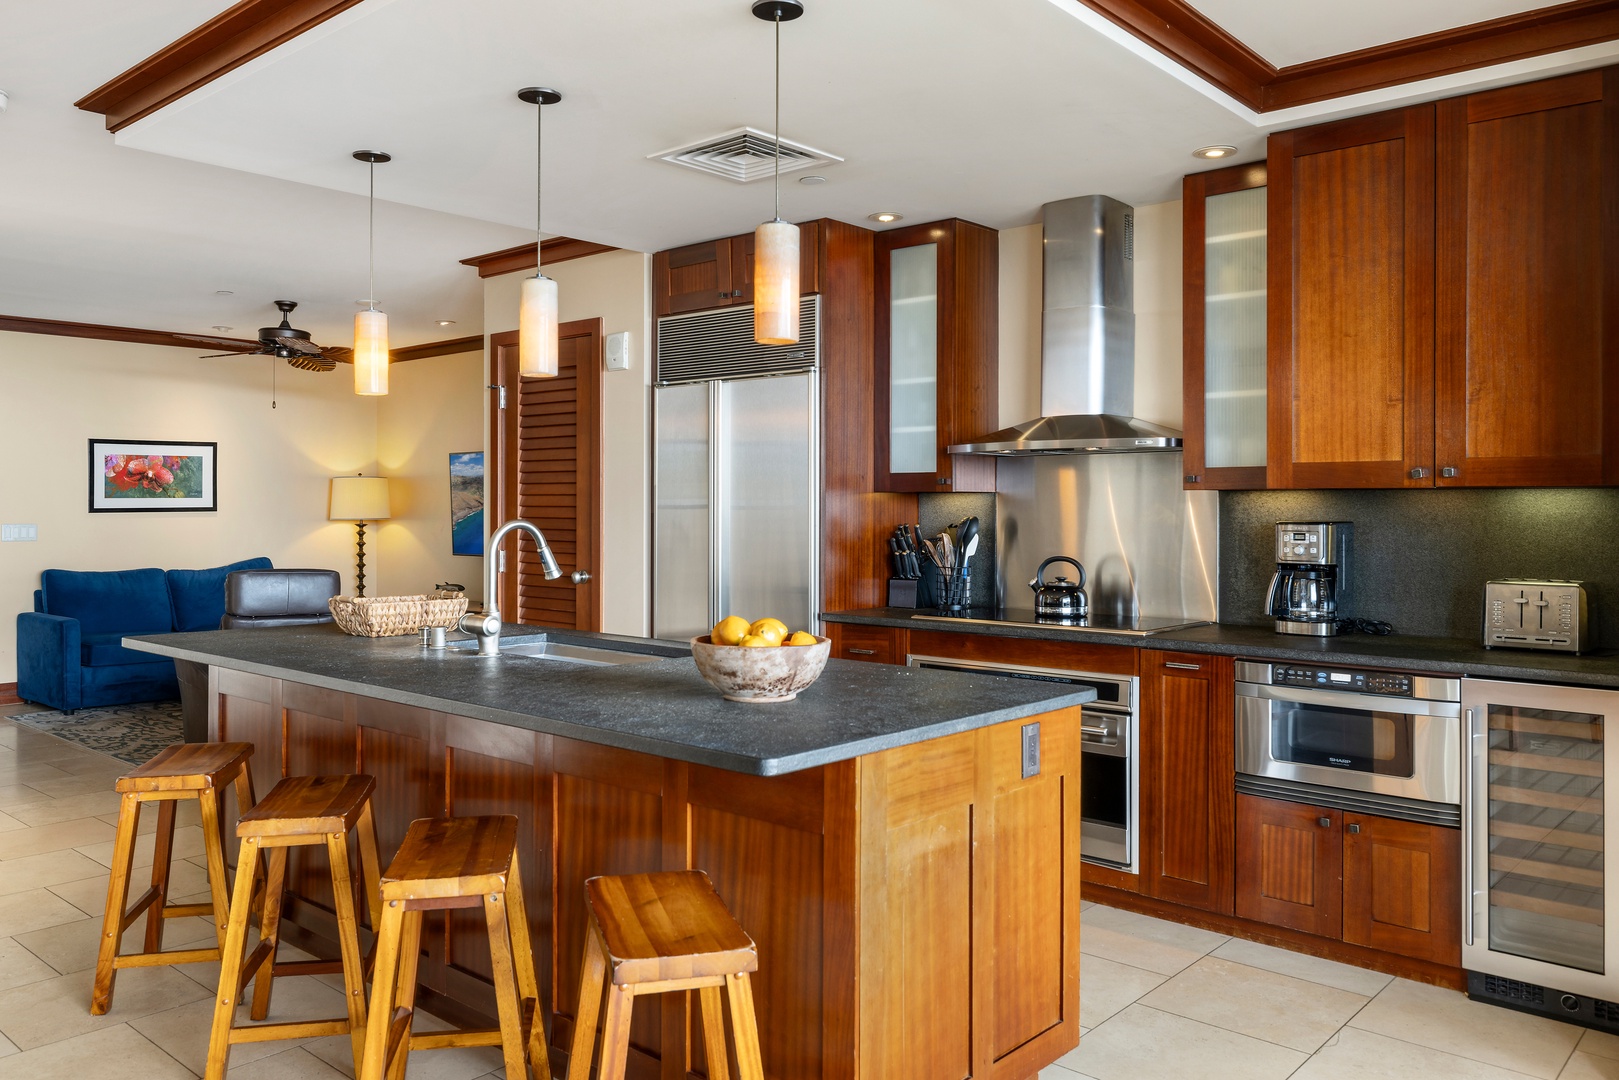 Kapolei Vacation Rentals, Ko Olina Beach Villas O1105 - Meal preparation is a pleasure with modern kitchen and large island space.